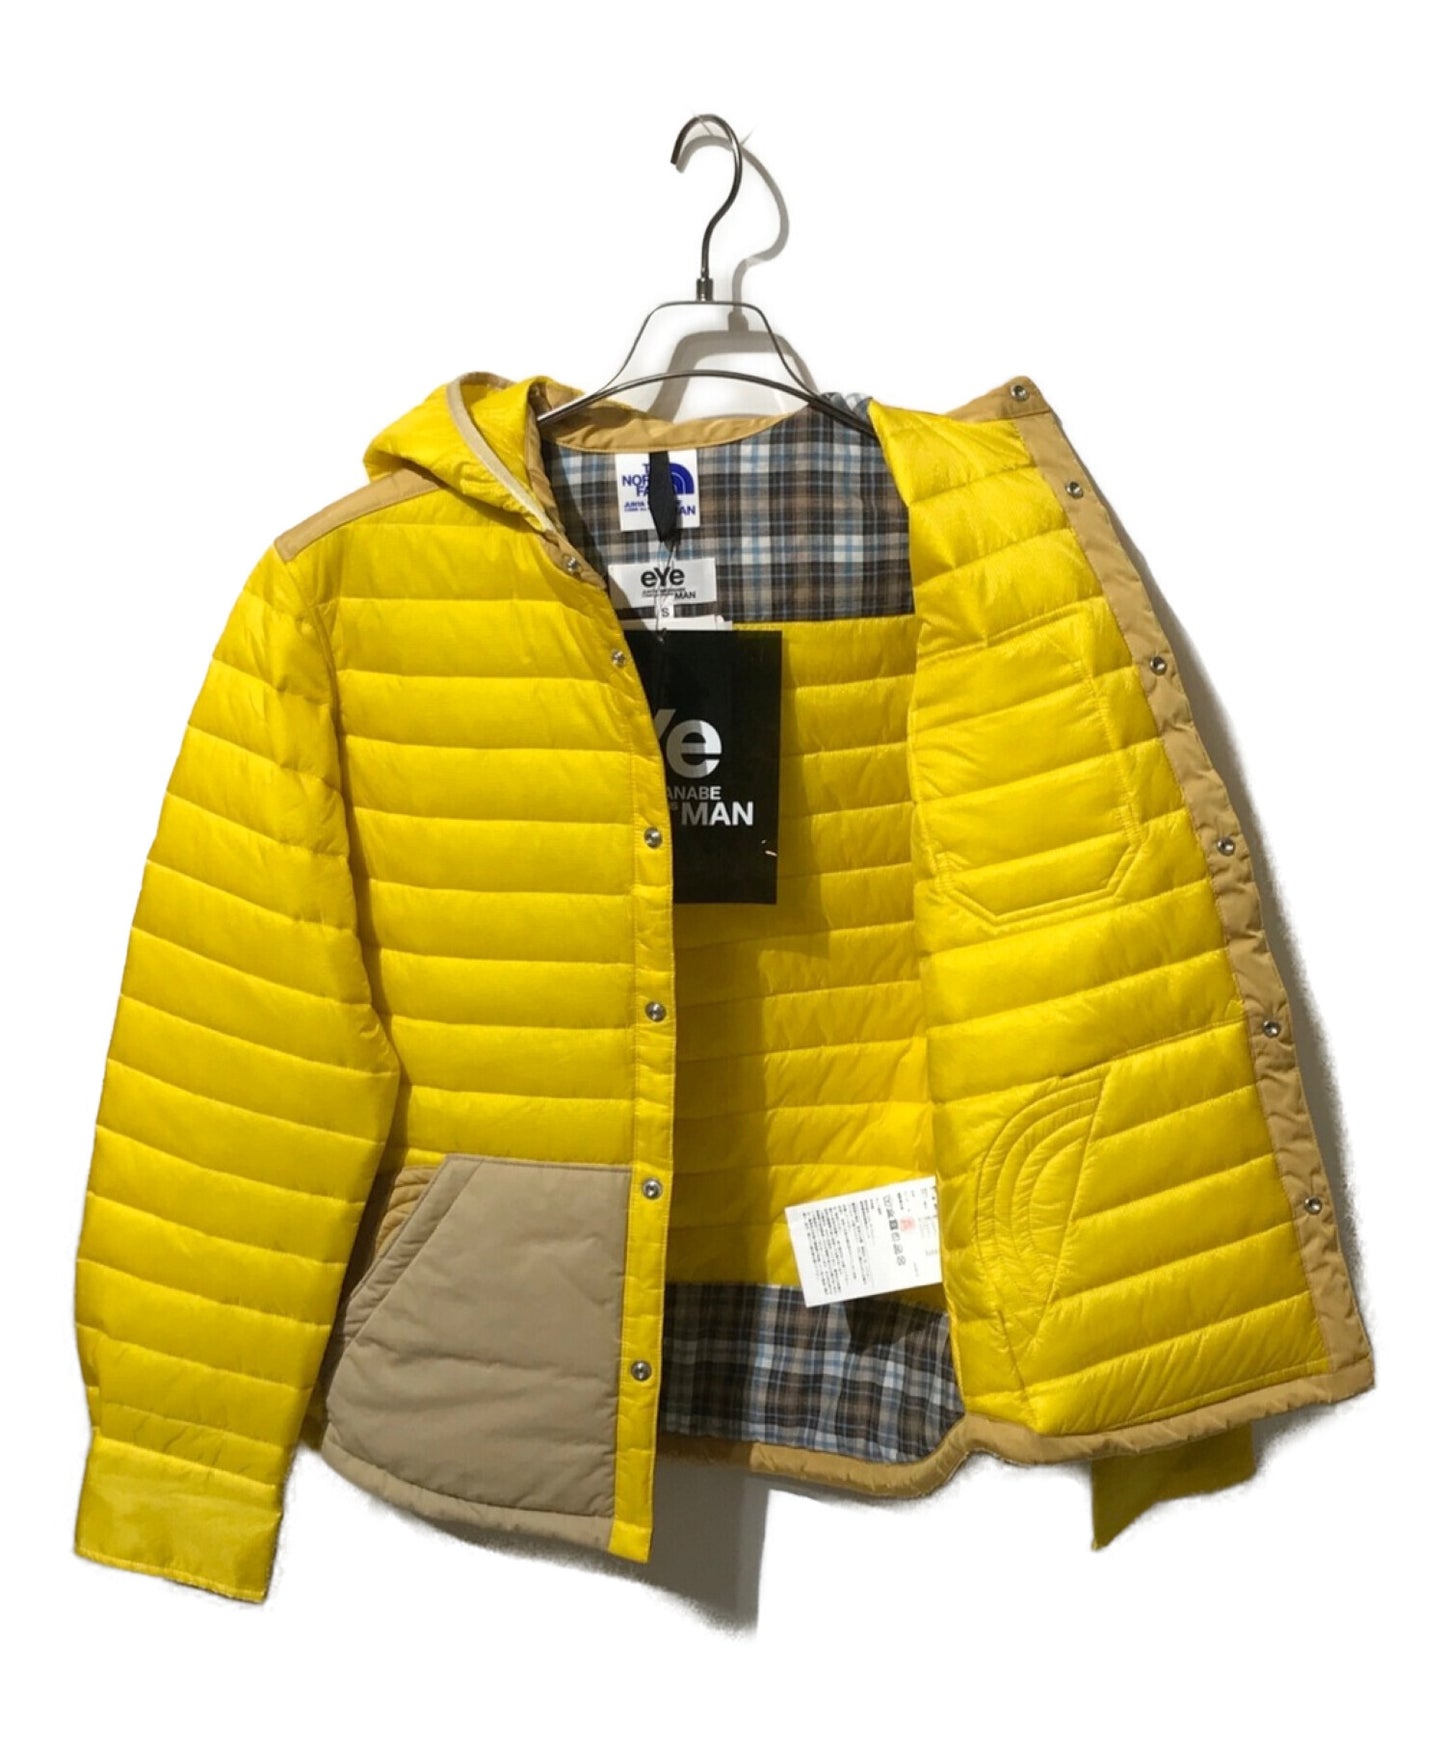 Comme des Garcons Junya Watanabe × The North Face Nylon switched cotton hooded jacket ny8191cg